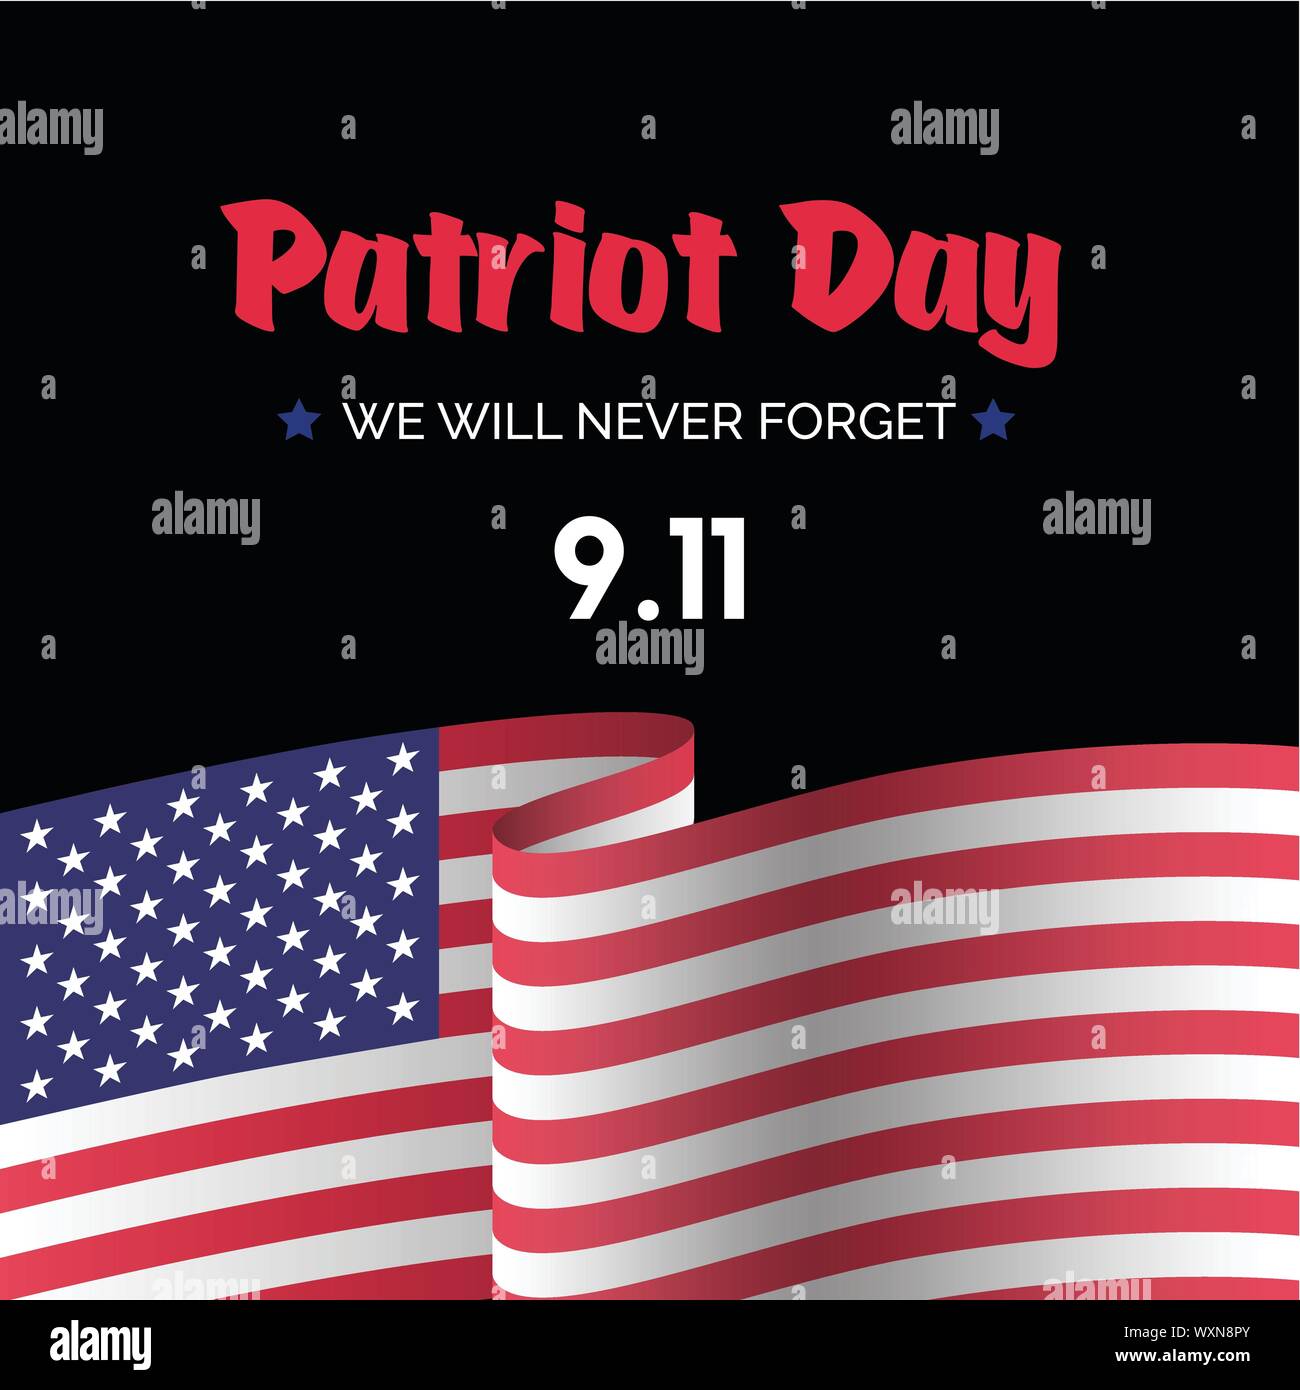 Patriot day vector card wit american flag Stock Vector